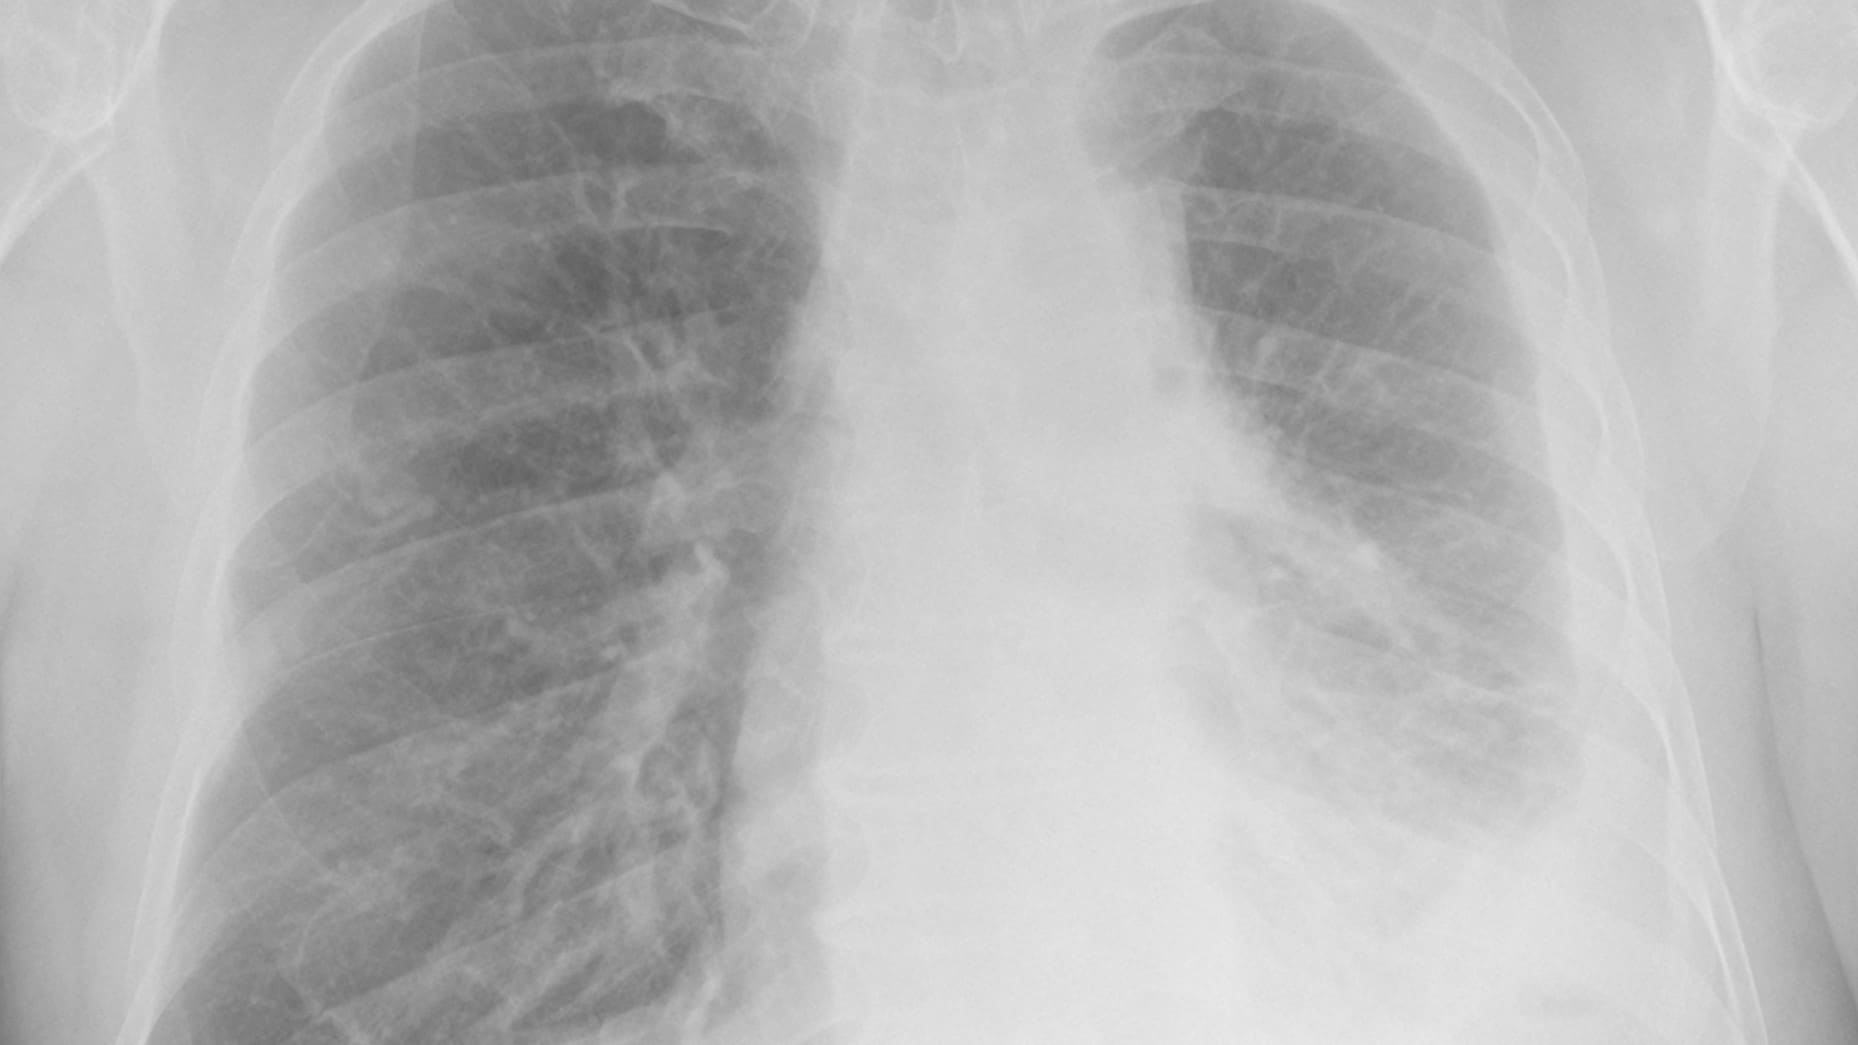 Chest x-ray of lungs with pneumoconiosis.